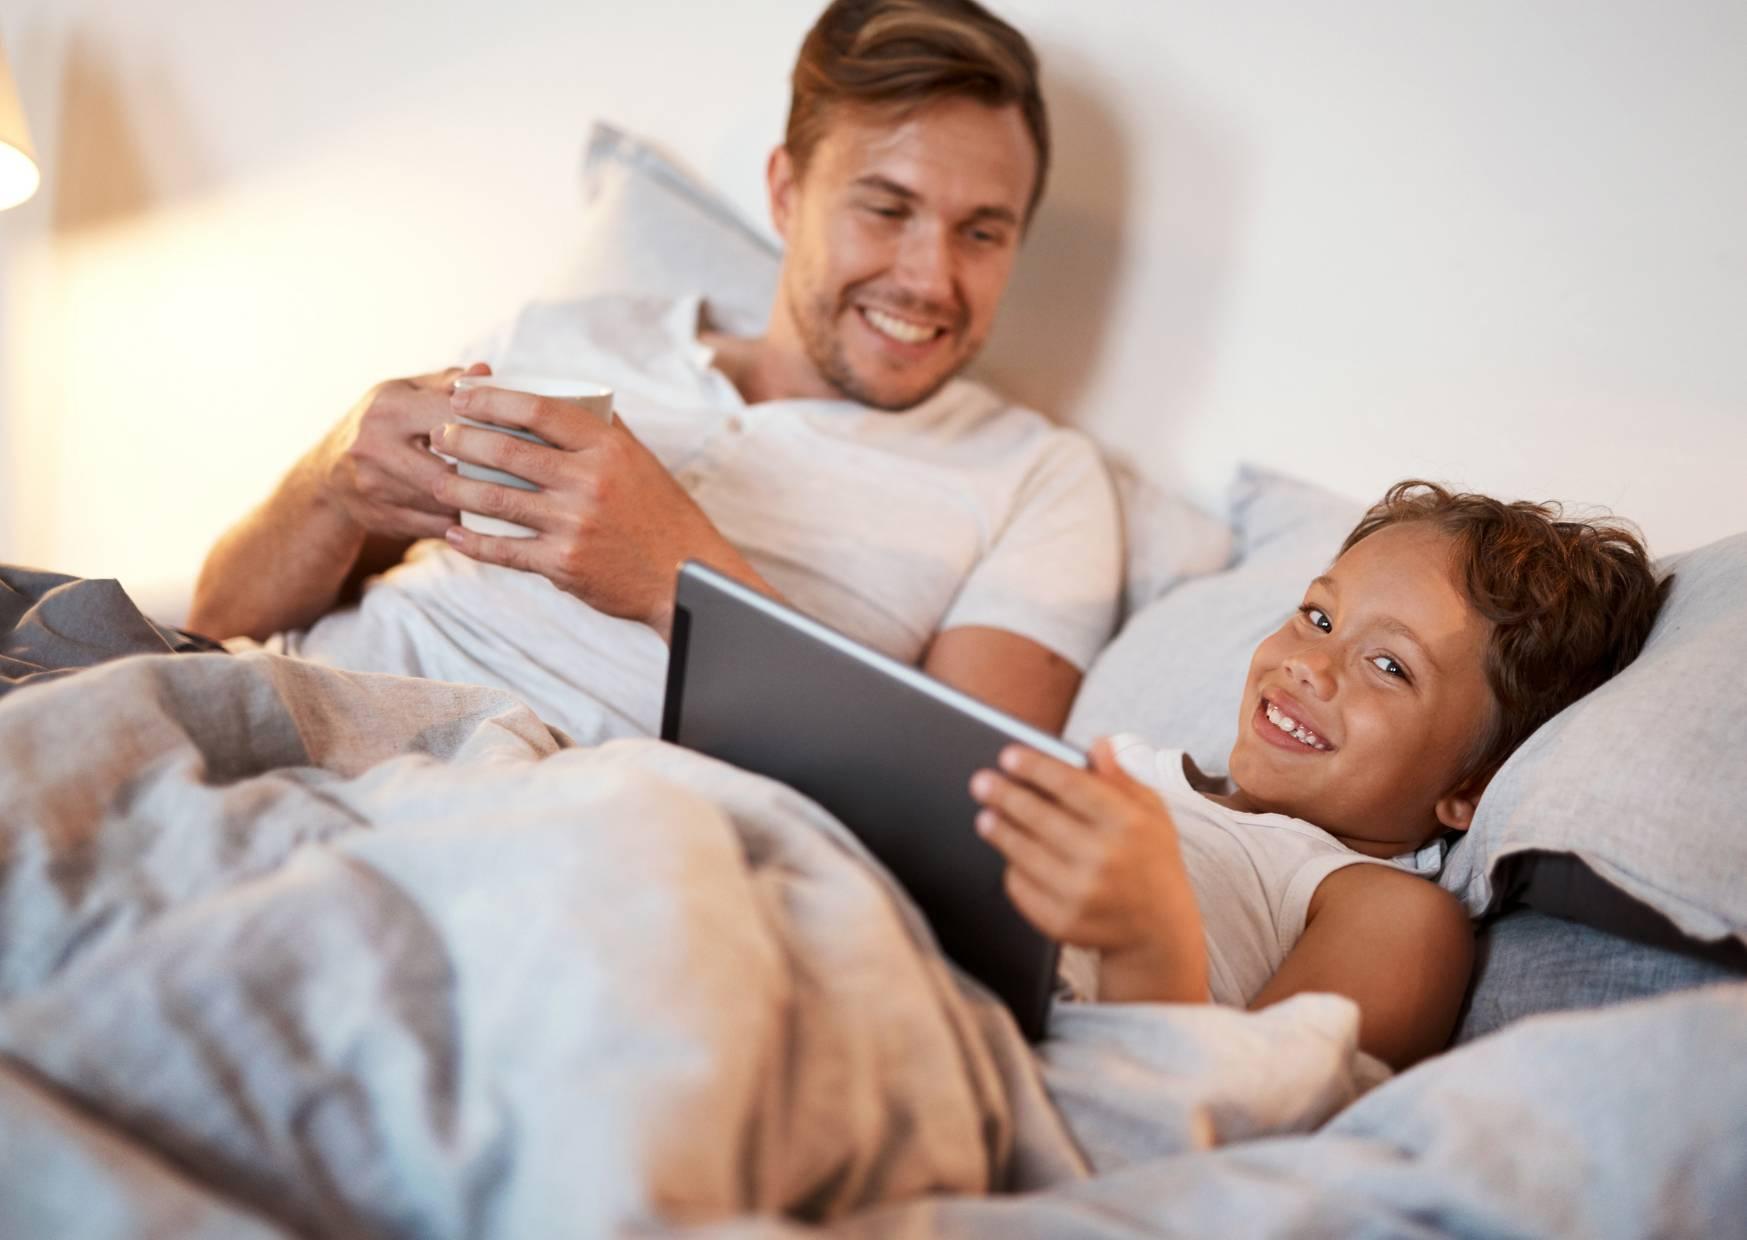 rest your eyes during screen time